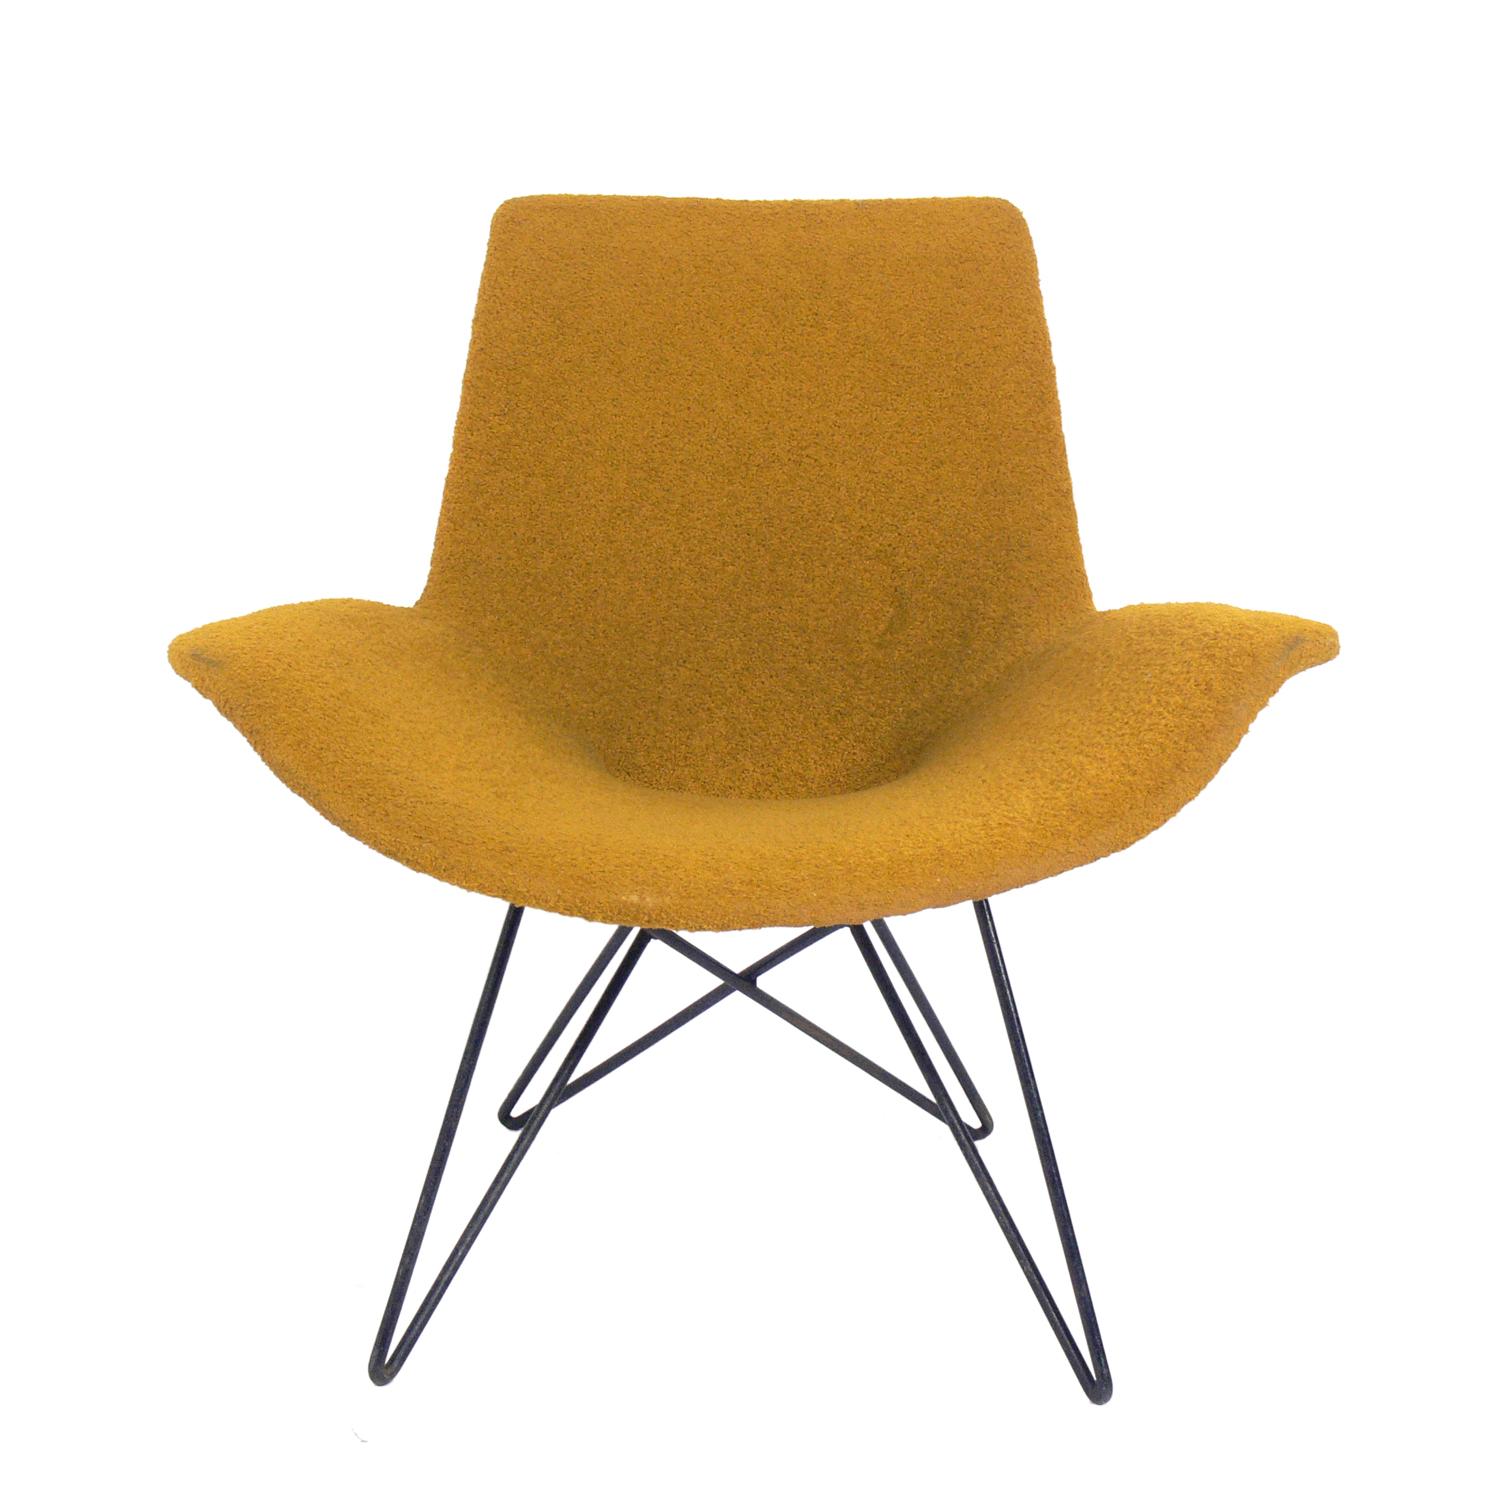 Curvaceous midcentury chair, attributed to Martin Eisler, Brazil, circa 1950s. Retains its original yellow bouclé upholstery and original patina to the iron base.